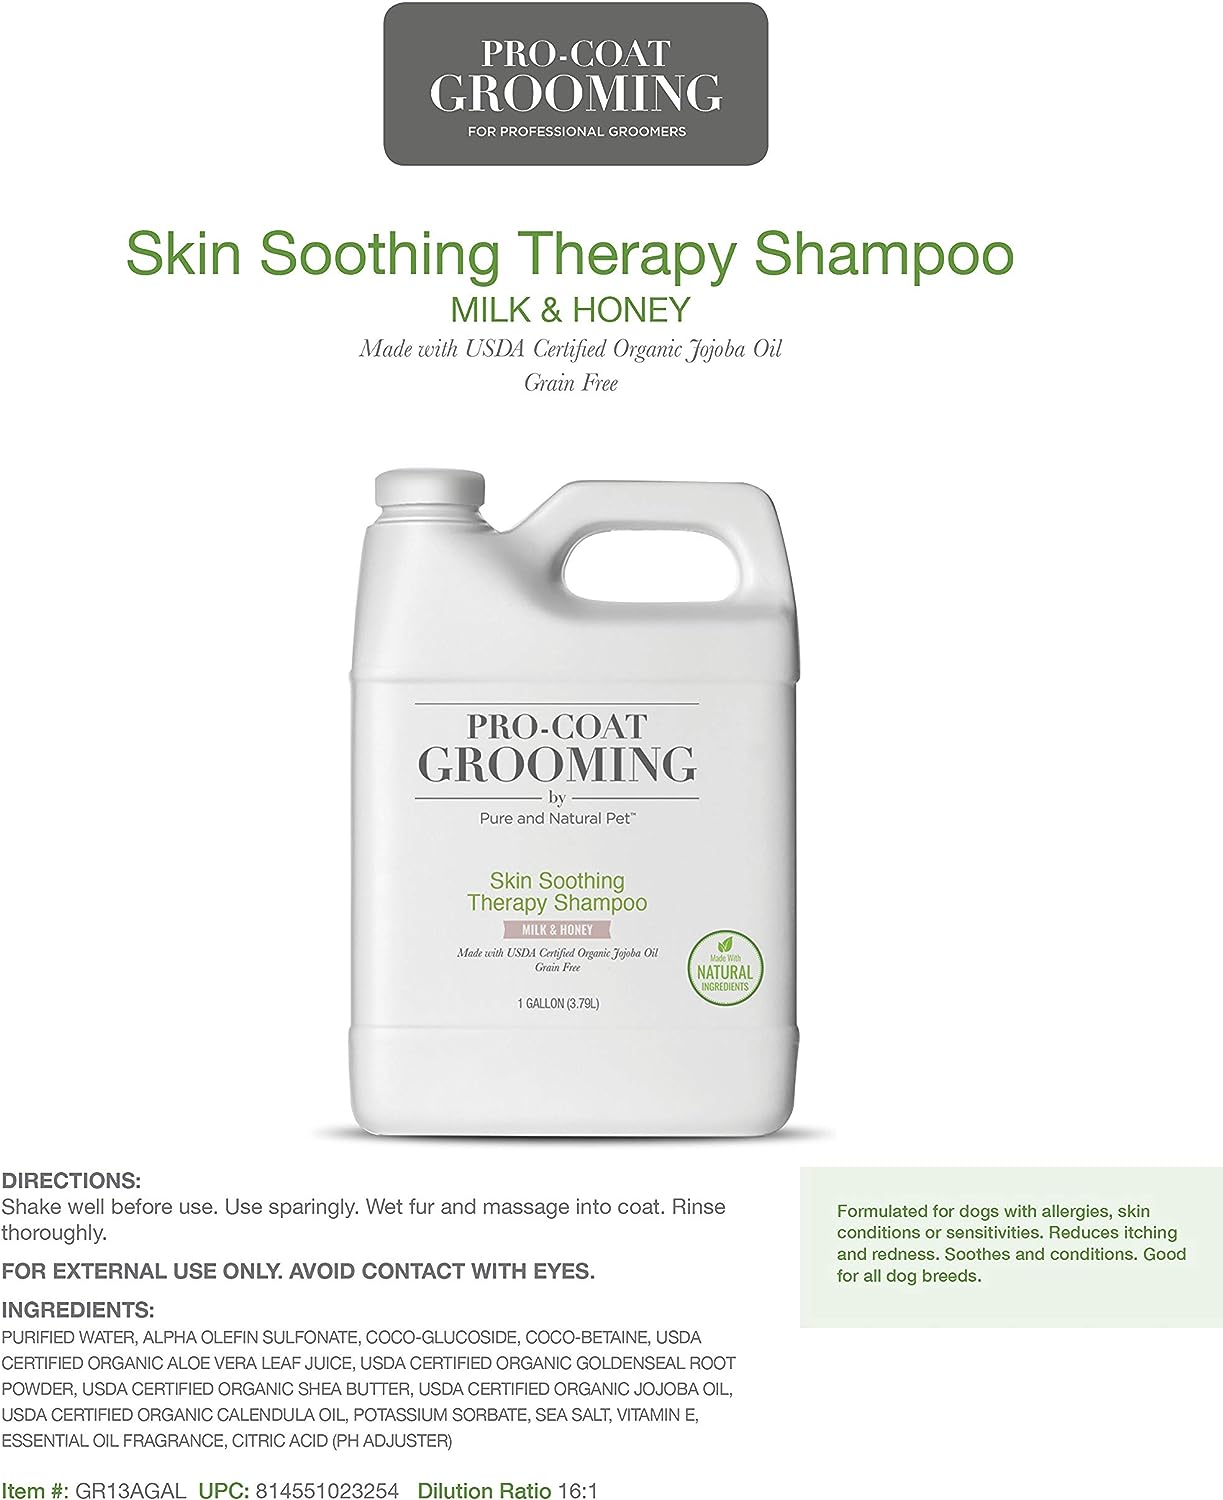 Skin Soothing Therapy Shampoo